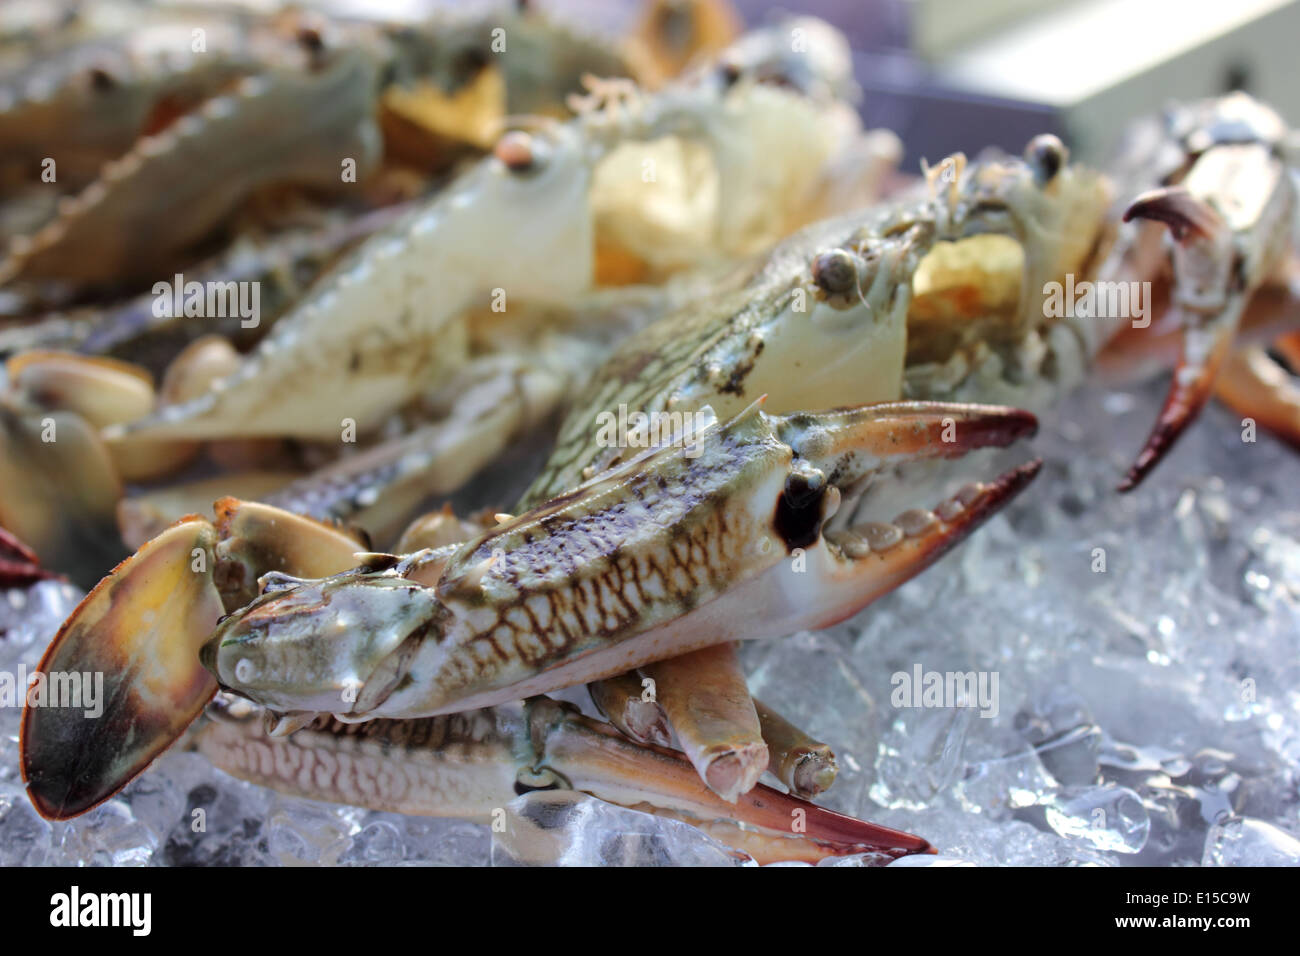 A closeup Crab on ice in market Stock Photo